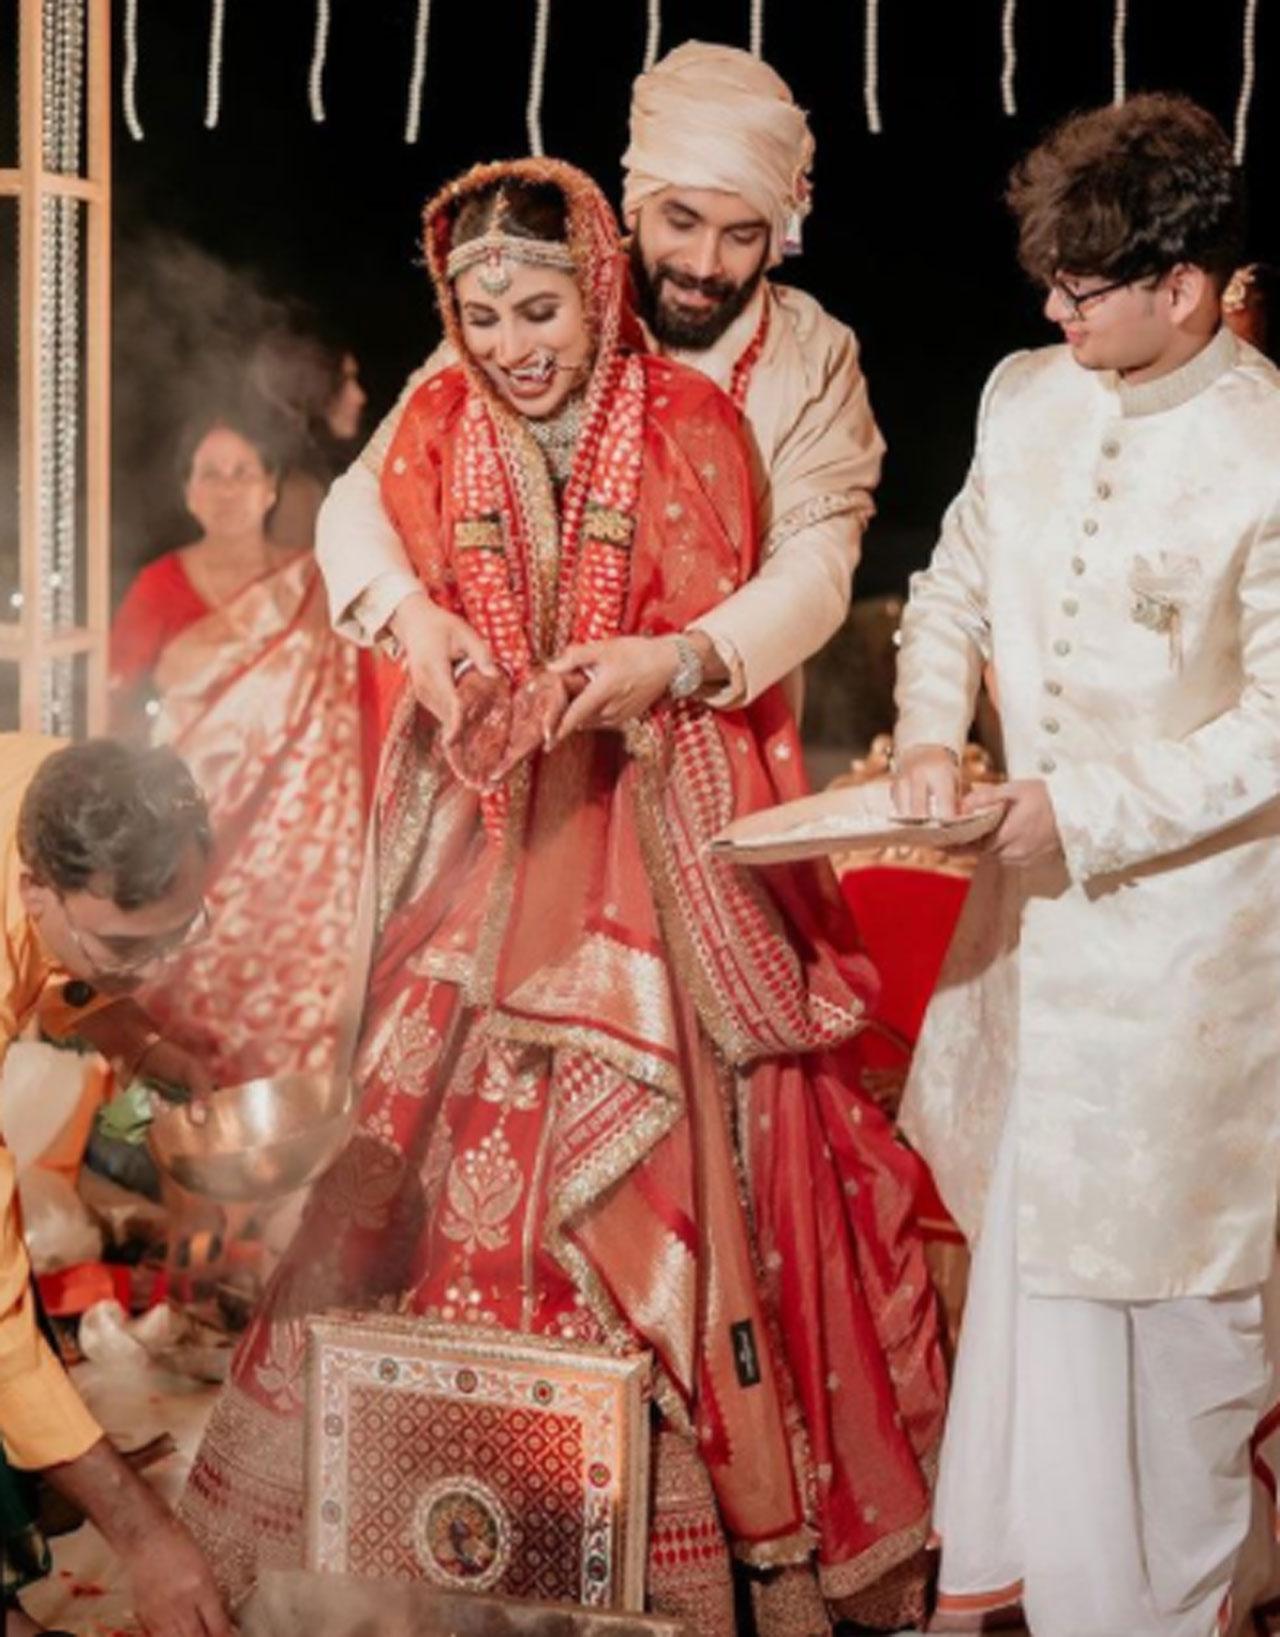 Previously, several other stars who were a part of the wedding festivities including Arjun Bijlani, Mandira Bedi, Jia Mustafa, and more shared pictures from the festivities along with heartfelt messages on their respective social media handle.